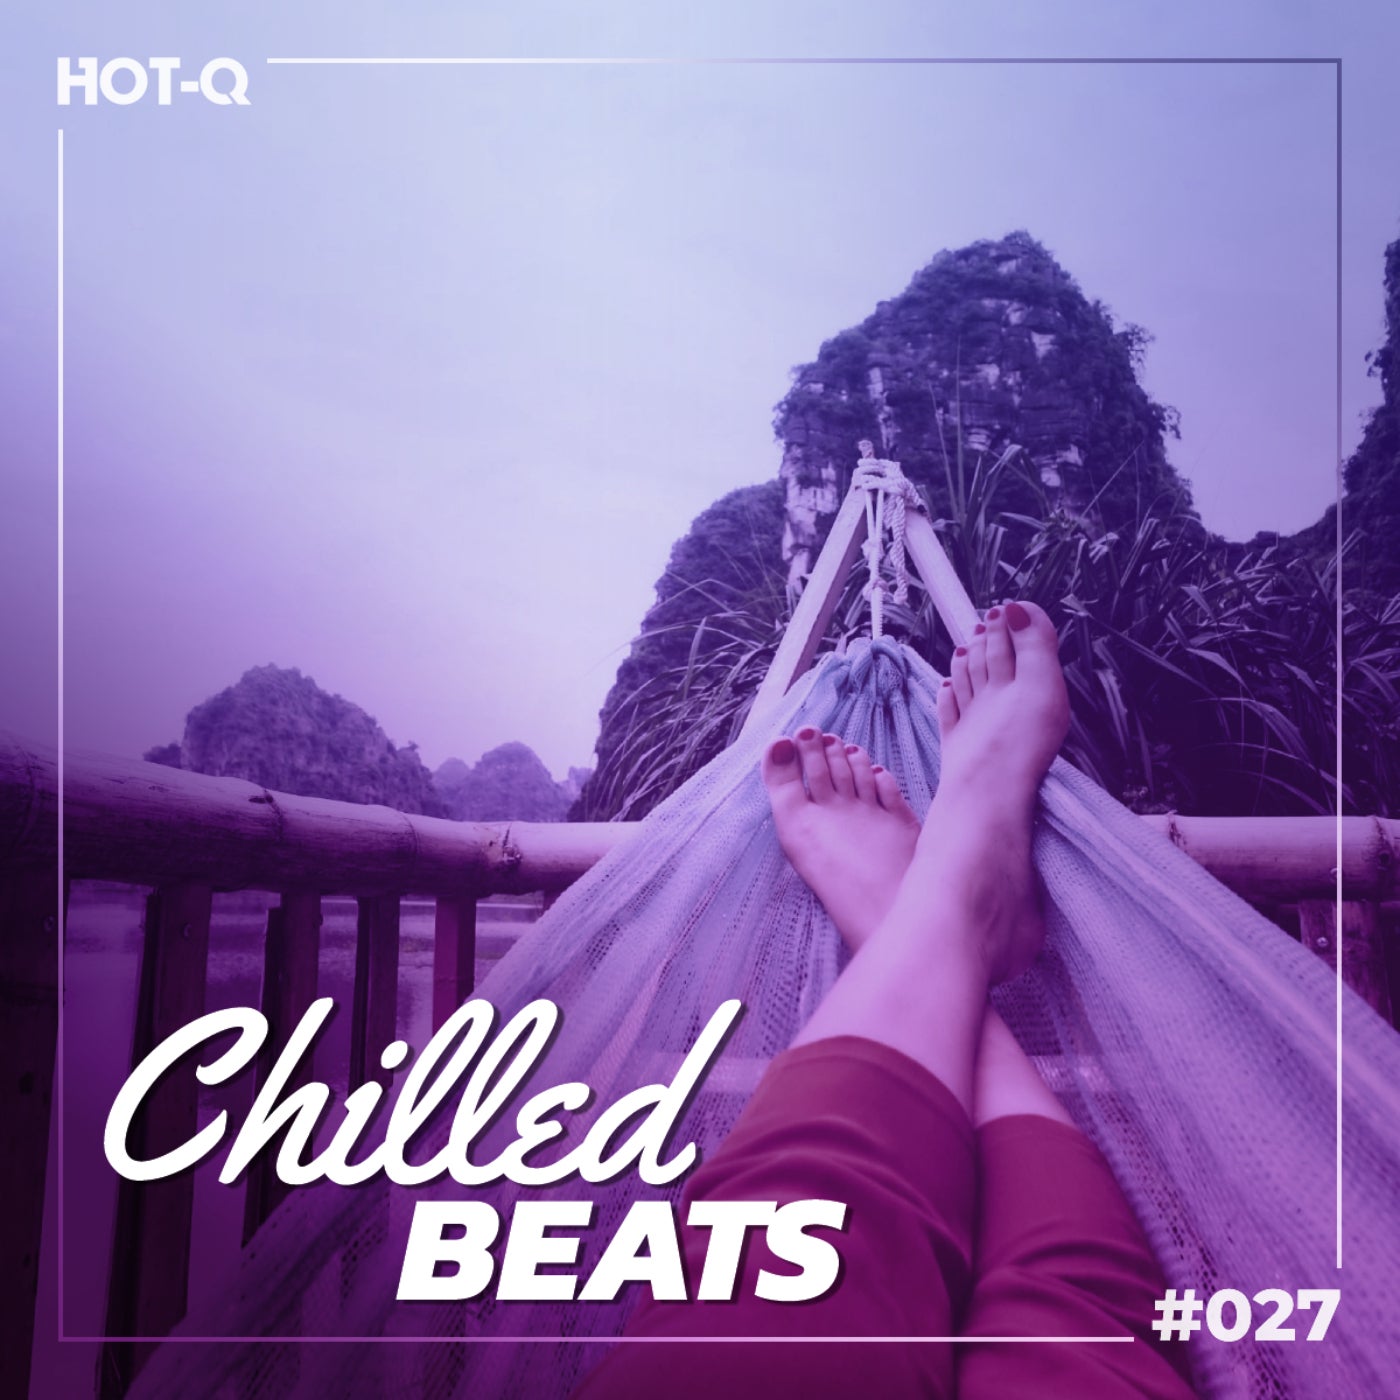 Chilled Beats 027